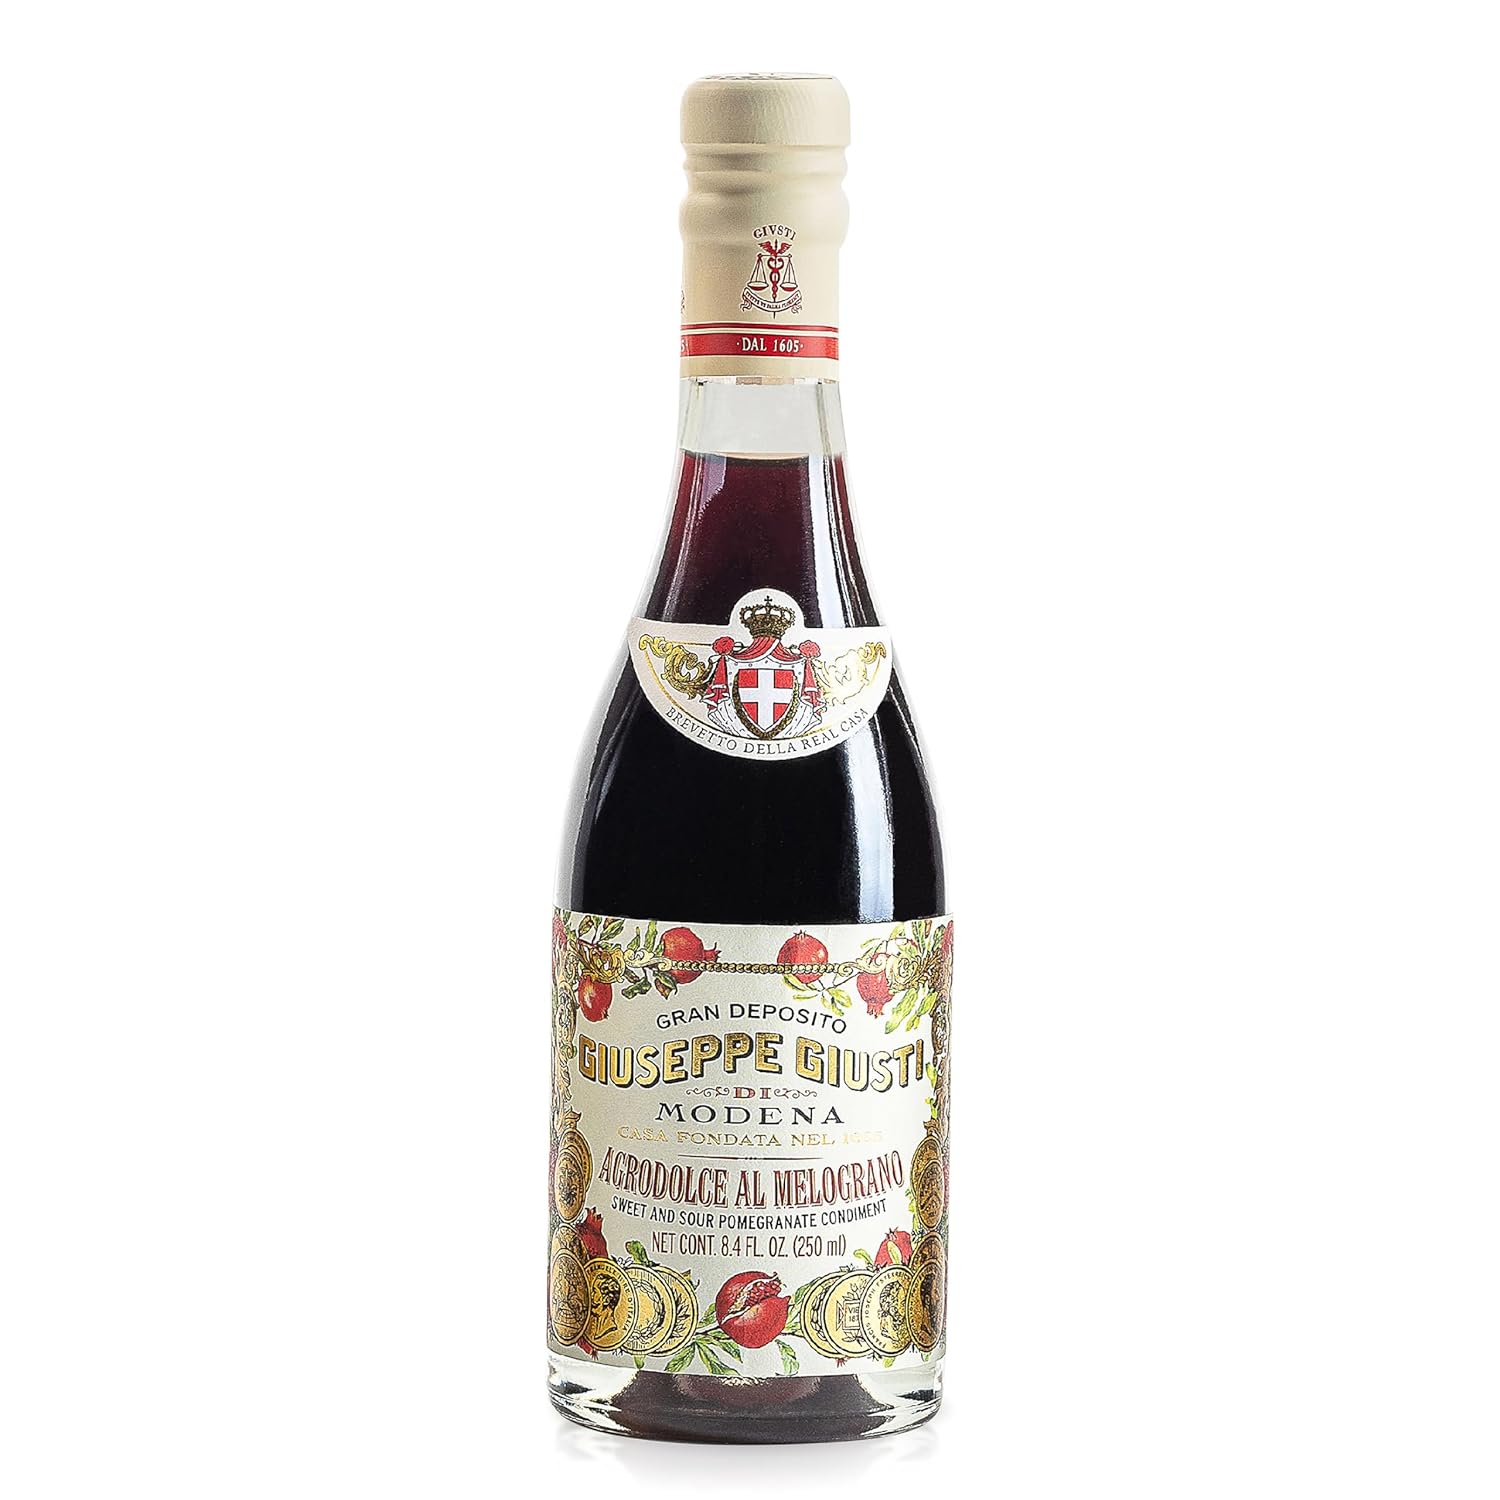 Giusti Pomegranate Vinegar Sweet and Sour Gourmet Fruit Condiment from Modena, Italy - by Giusti